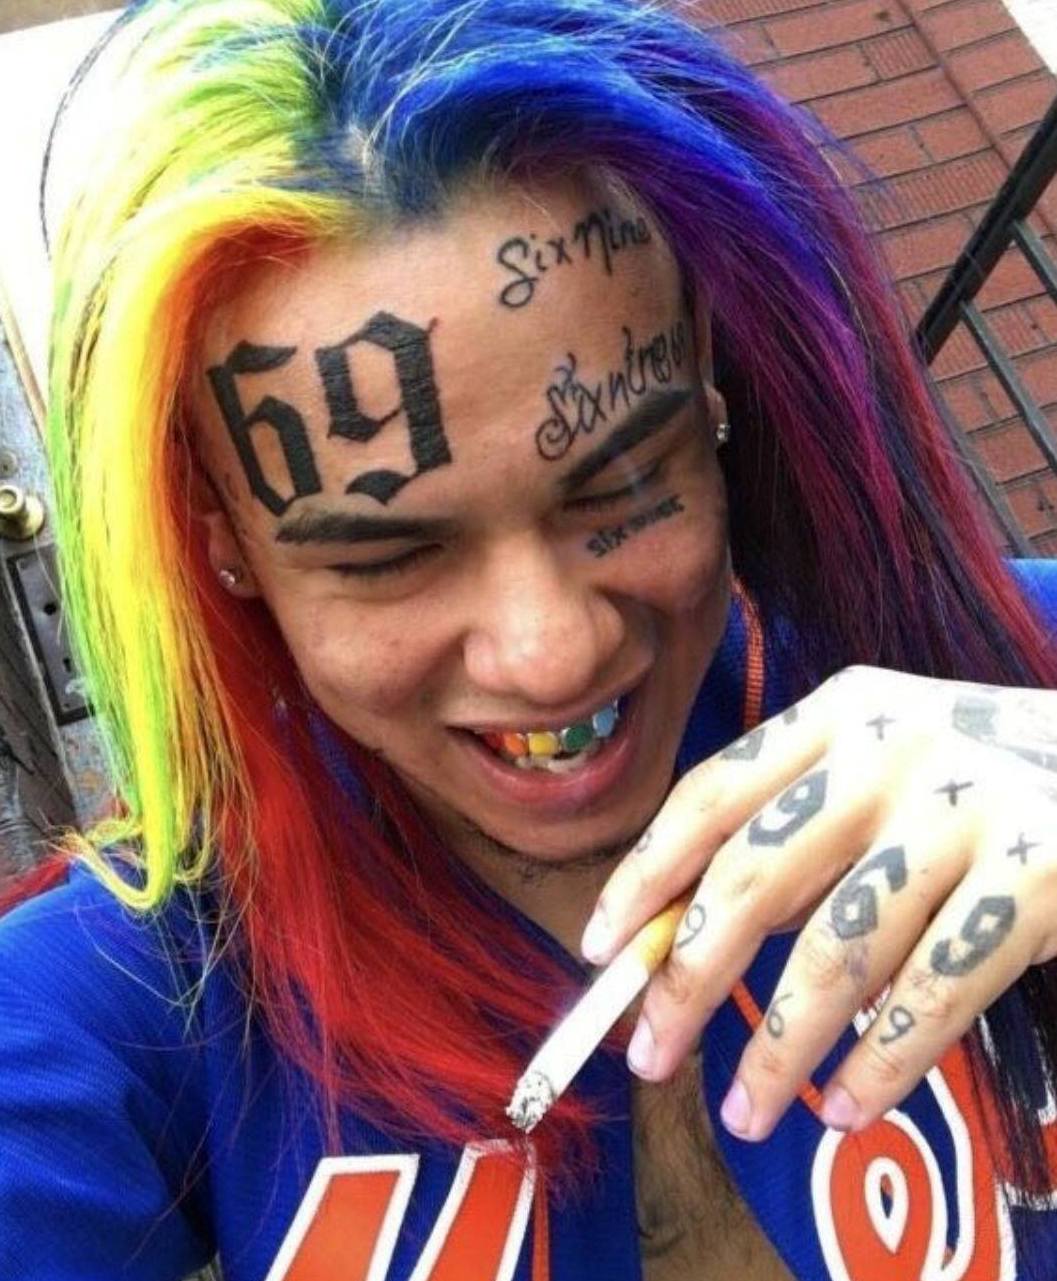 Here is 6ix9ine is all his SoundCloud candy glory. This dude must really love 69'ing! 